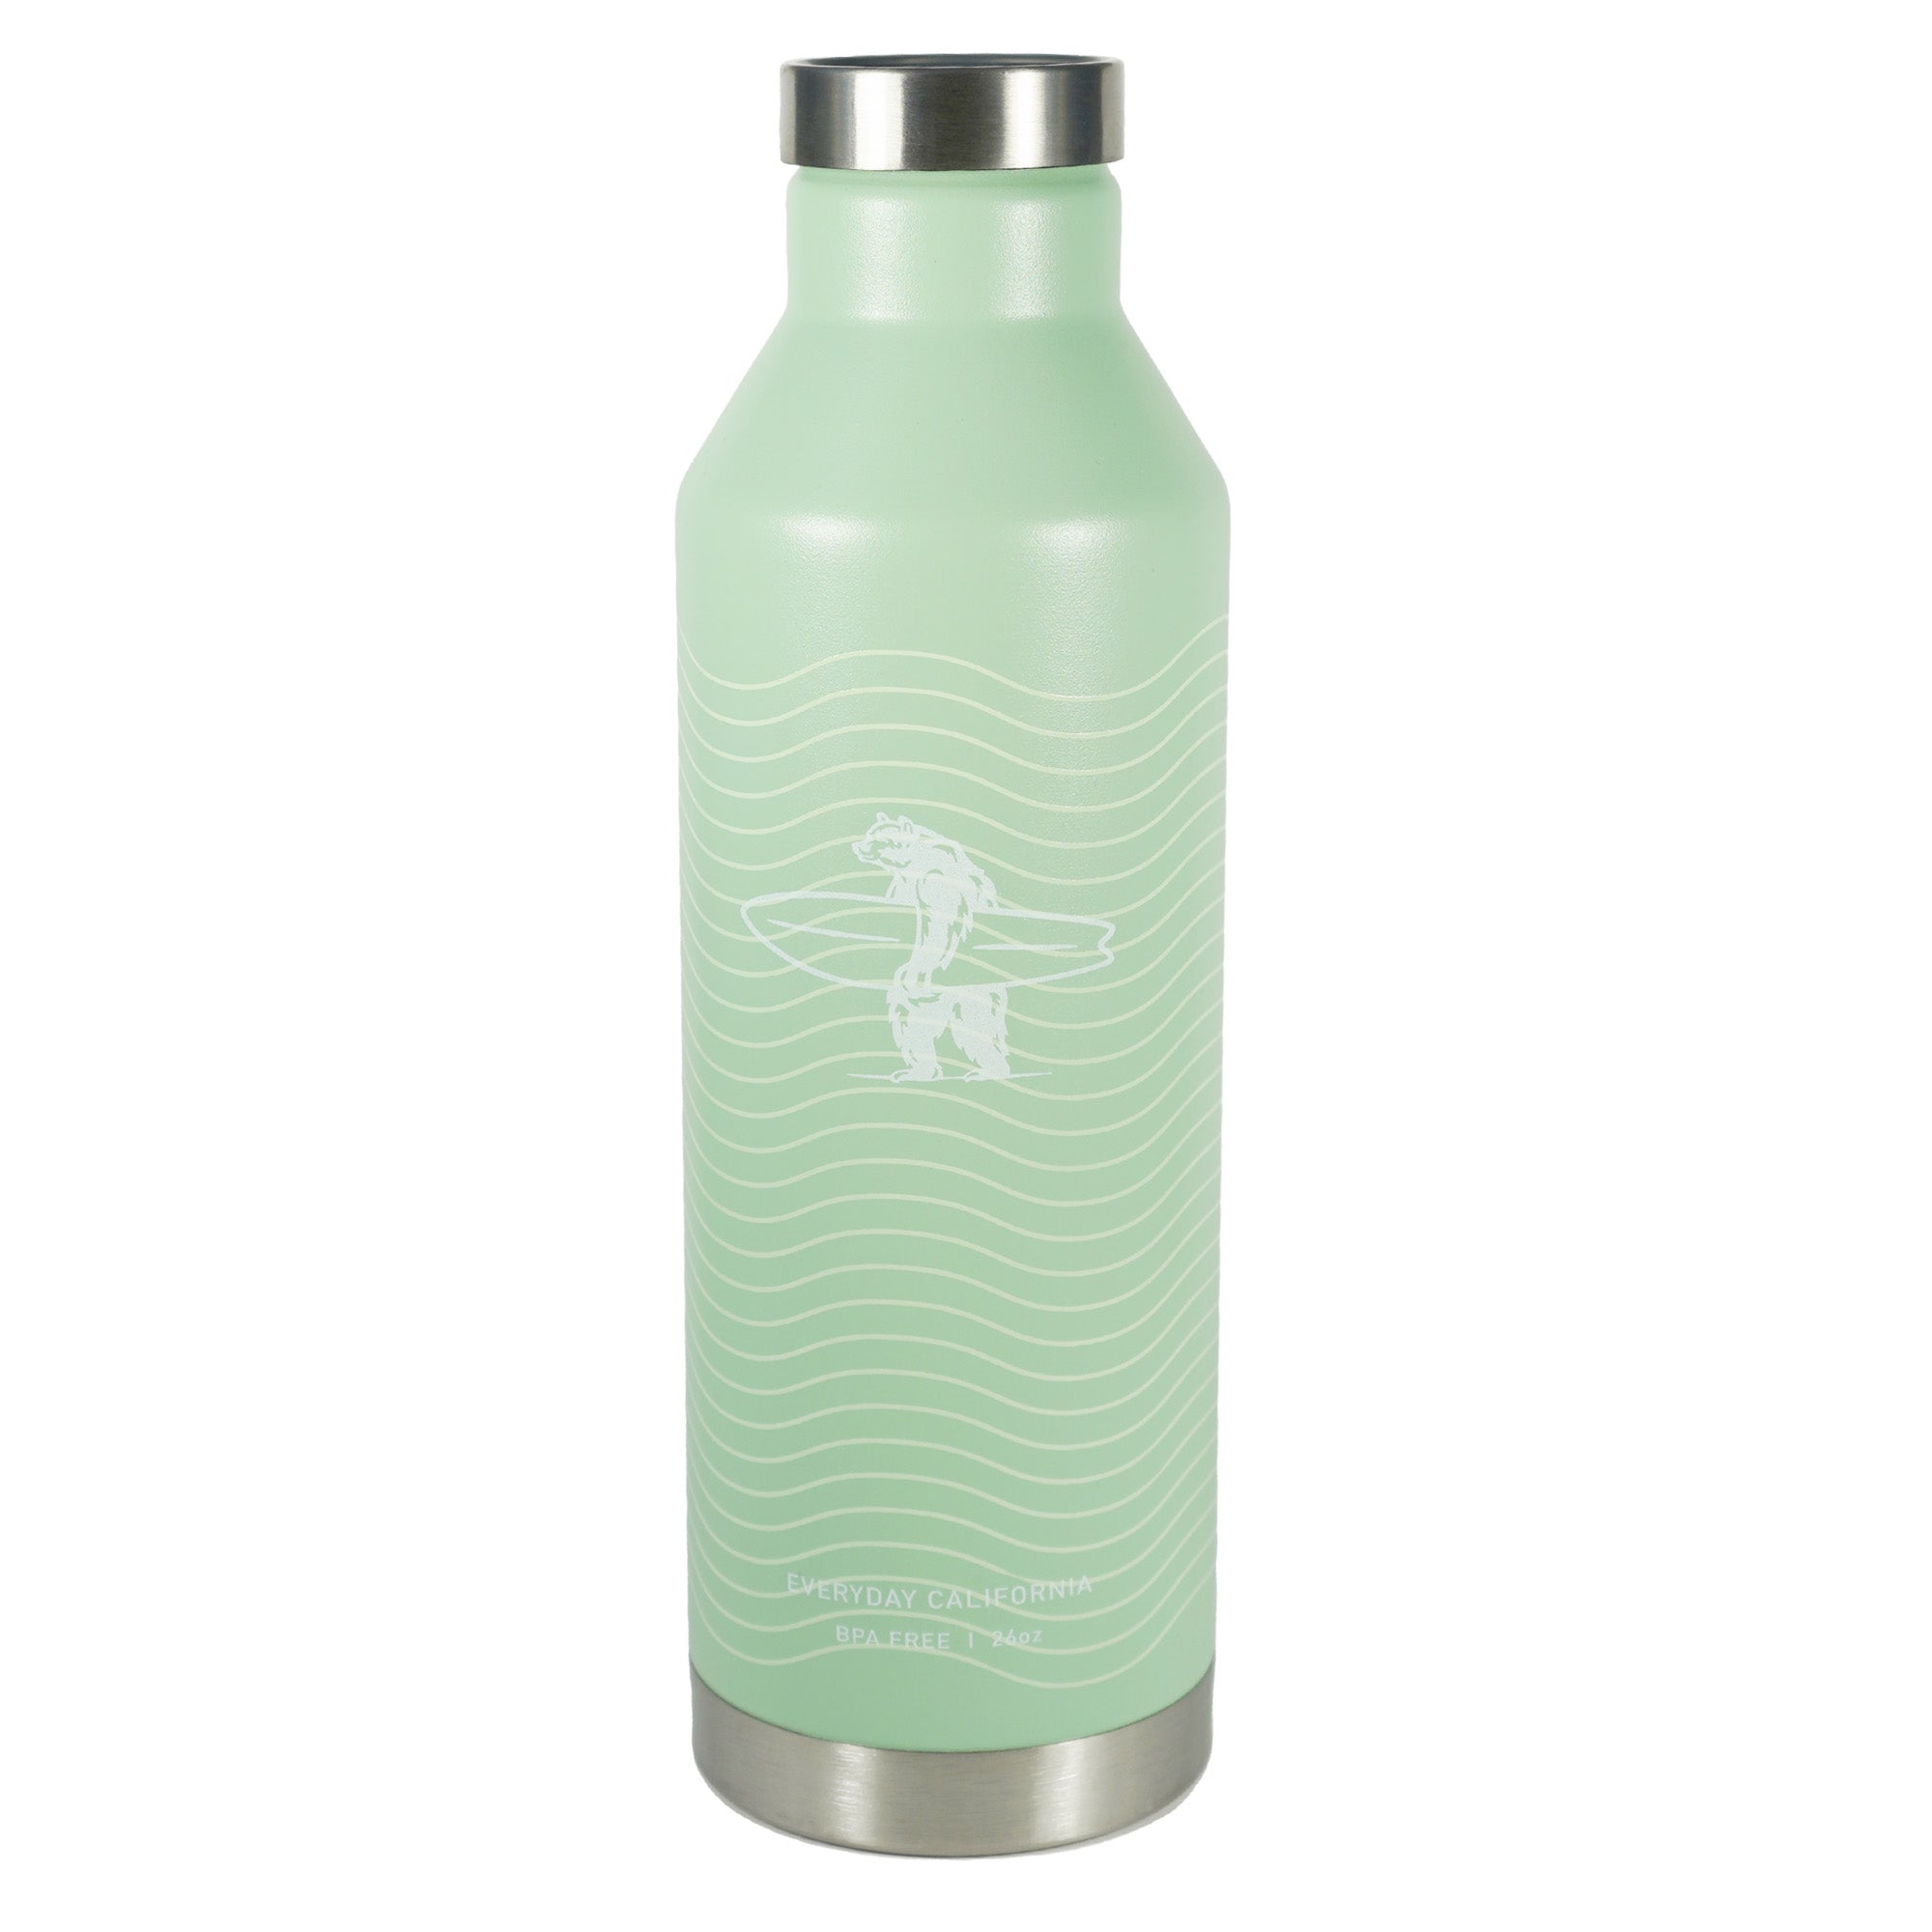 Everyday California seaglass Brutus insulated waterbottle